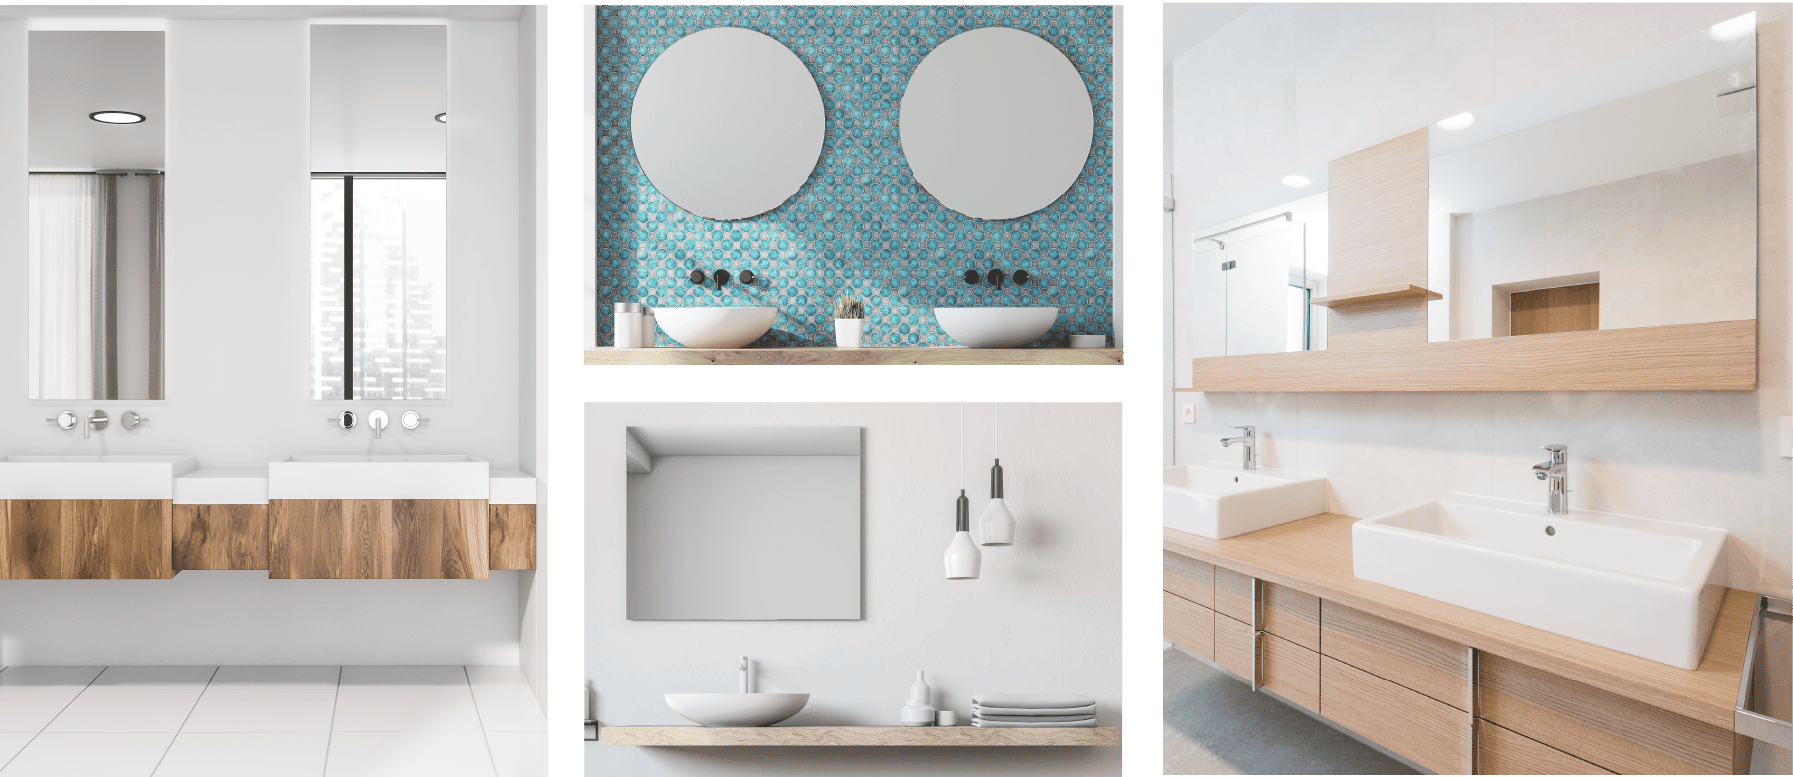 three images of mirrors installed into modern bathrooms